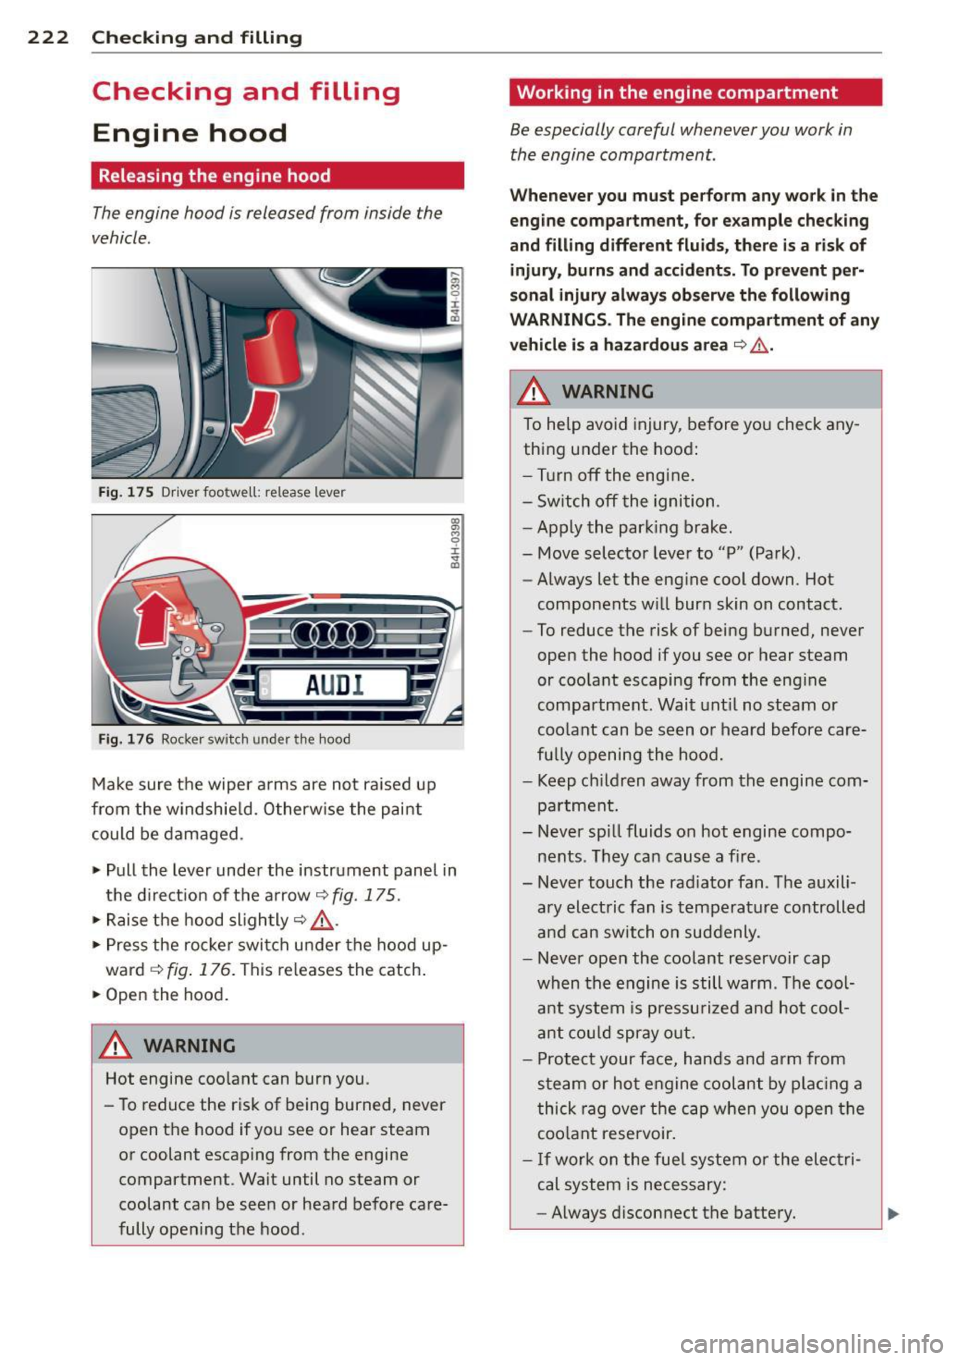 AUDI A8 2011  Owners Manual 222  Checking  and  filling 
Checking  and  filling Engine  hood 
Releasing the  engine  hood 
The engine  hood  is released  from  inside  the 
vehicle . 
Fig. 175 Driver foo twell:  release  lever 
